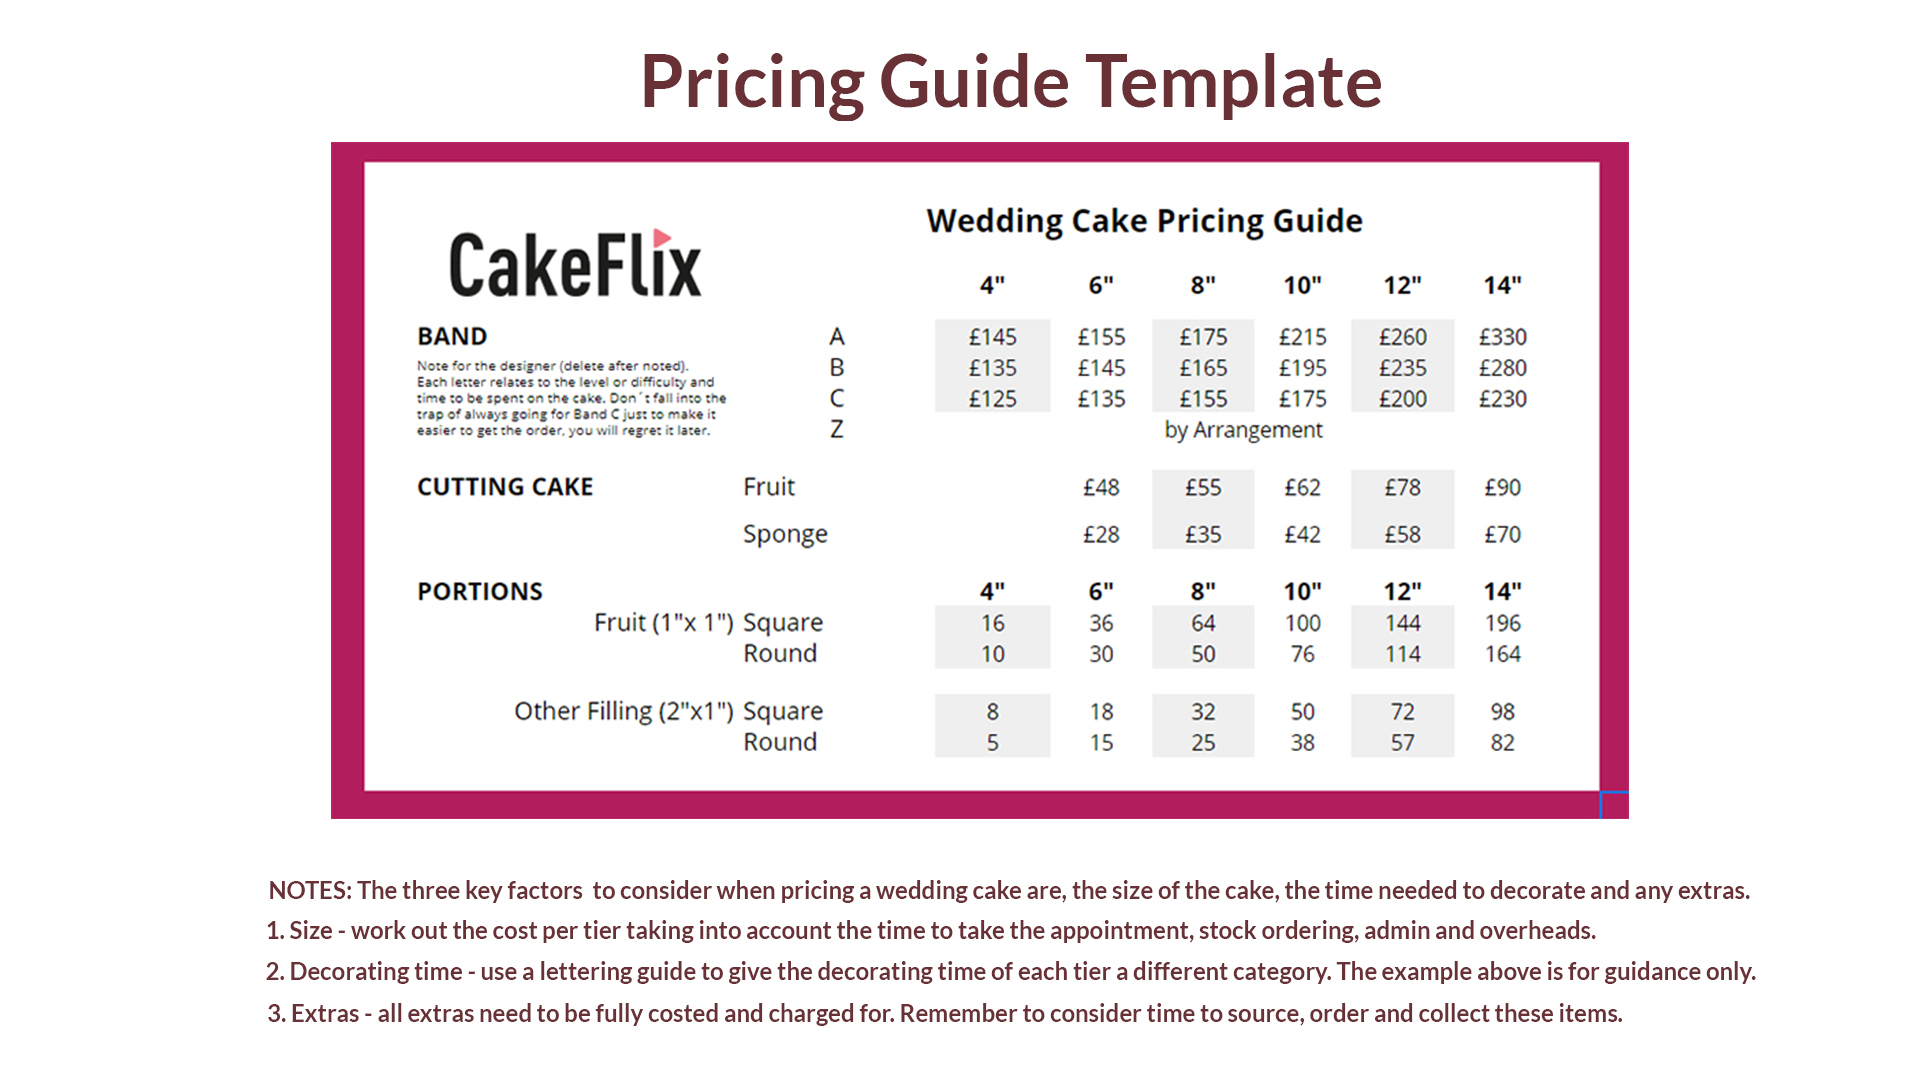 Pricing guide